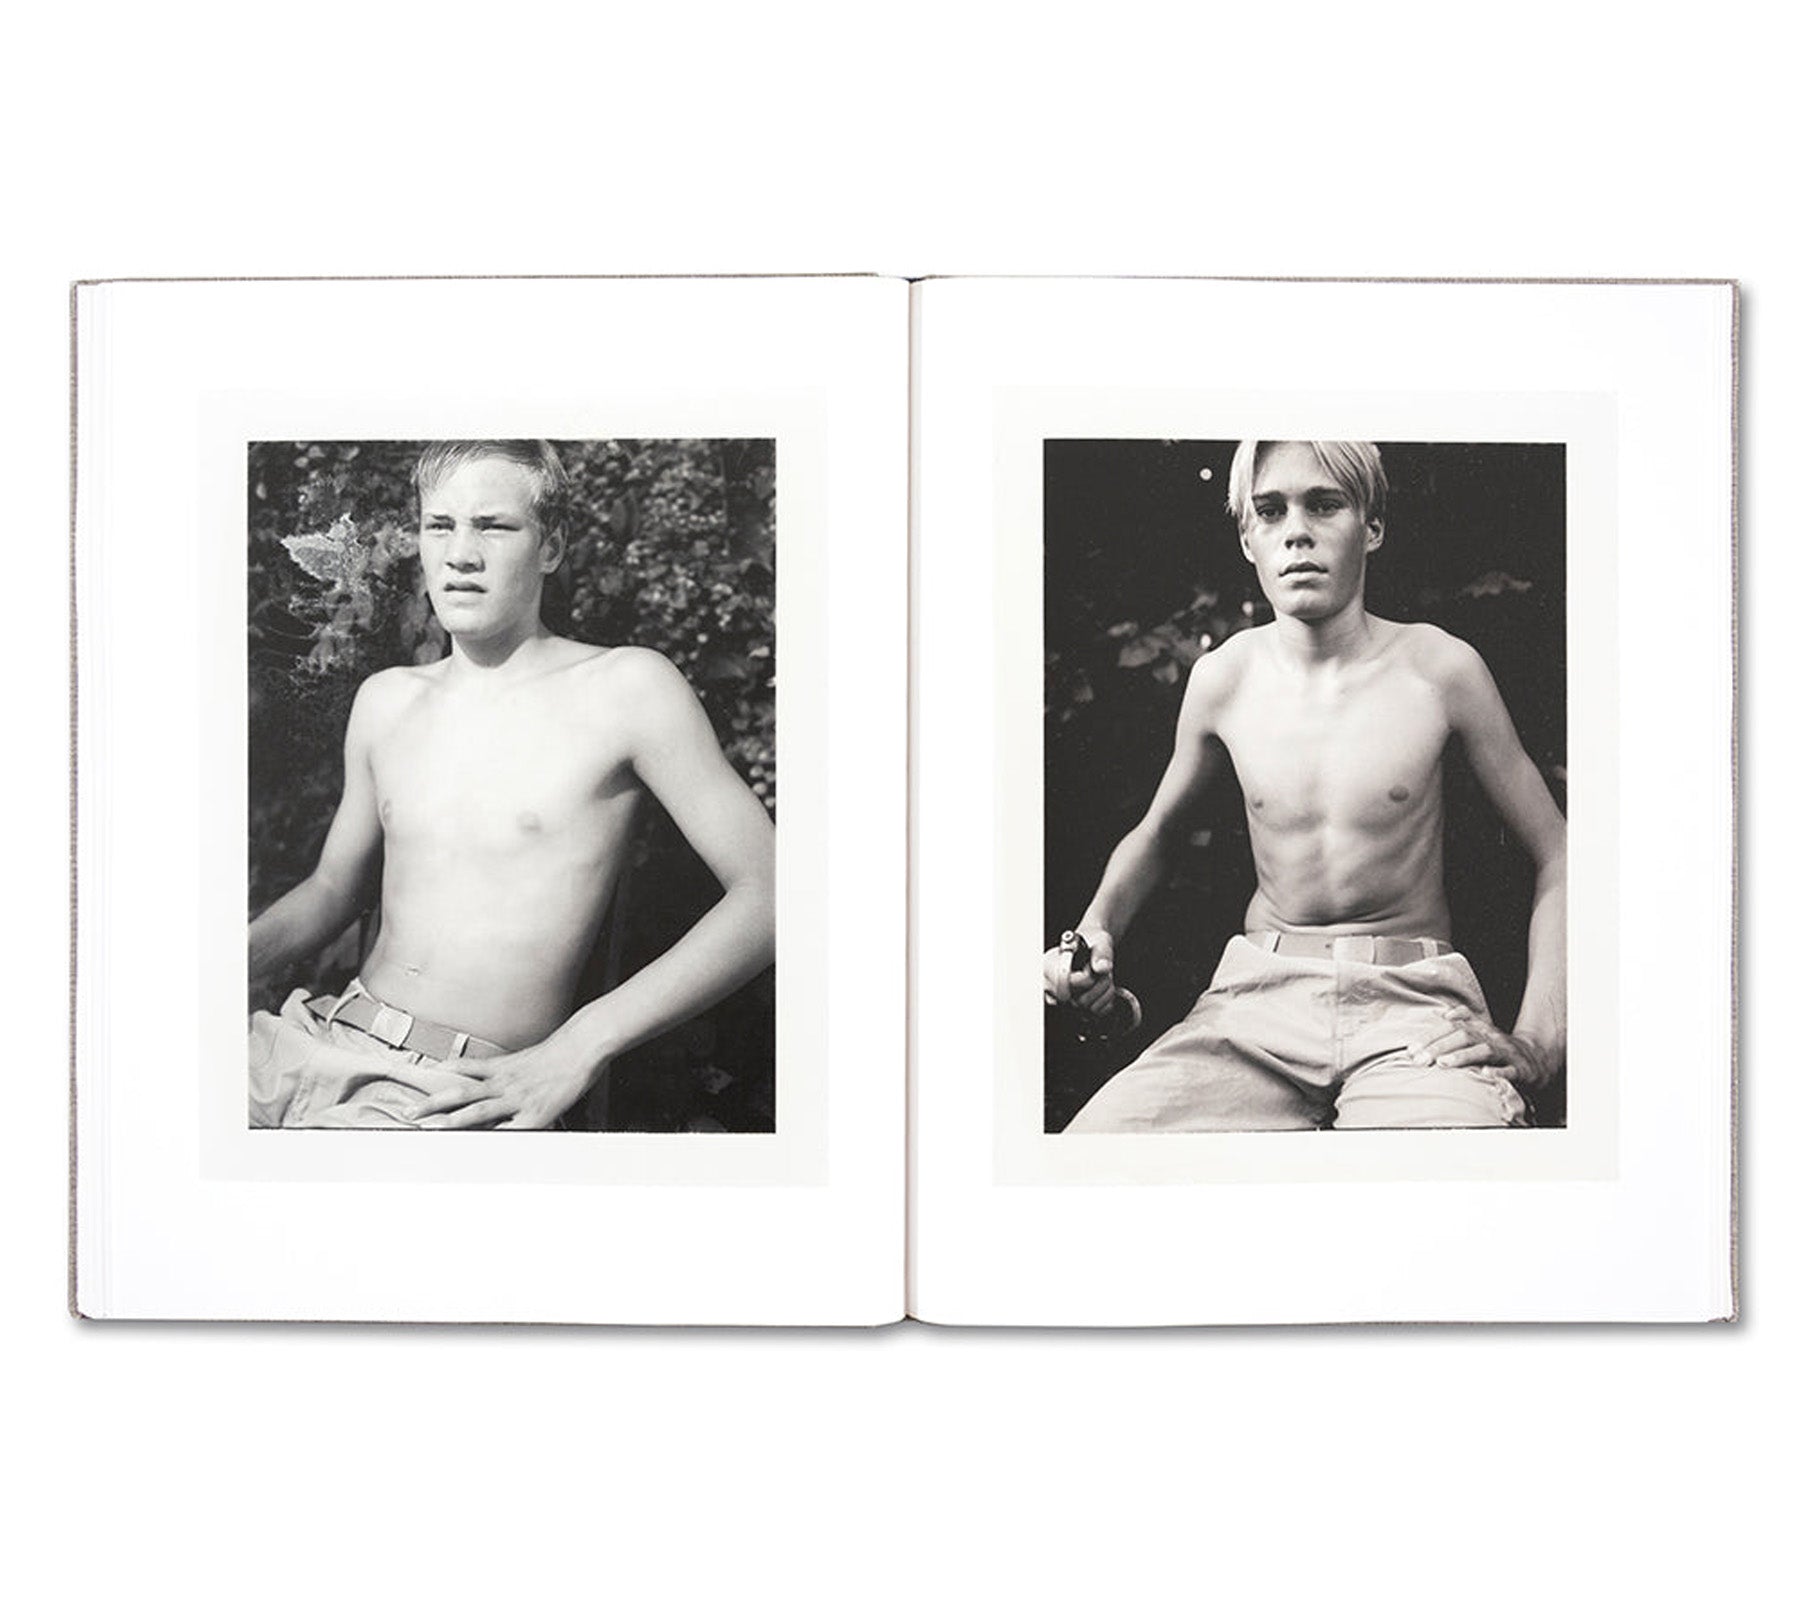 AUGUST by Collier Schorr [SIGNED]